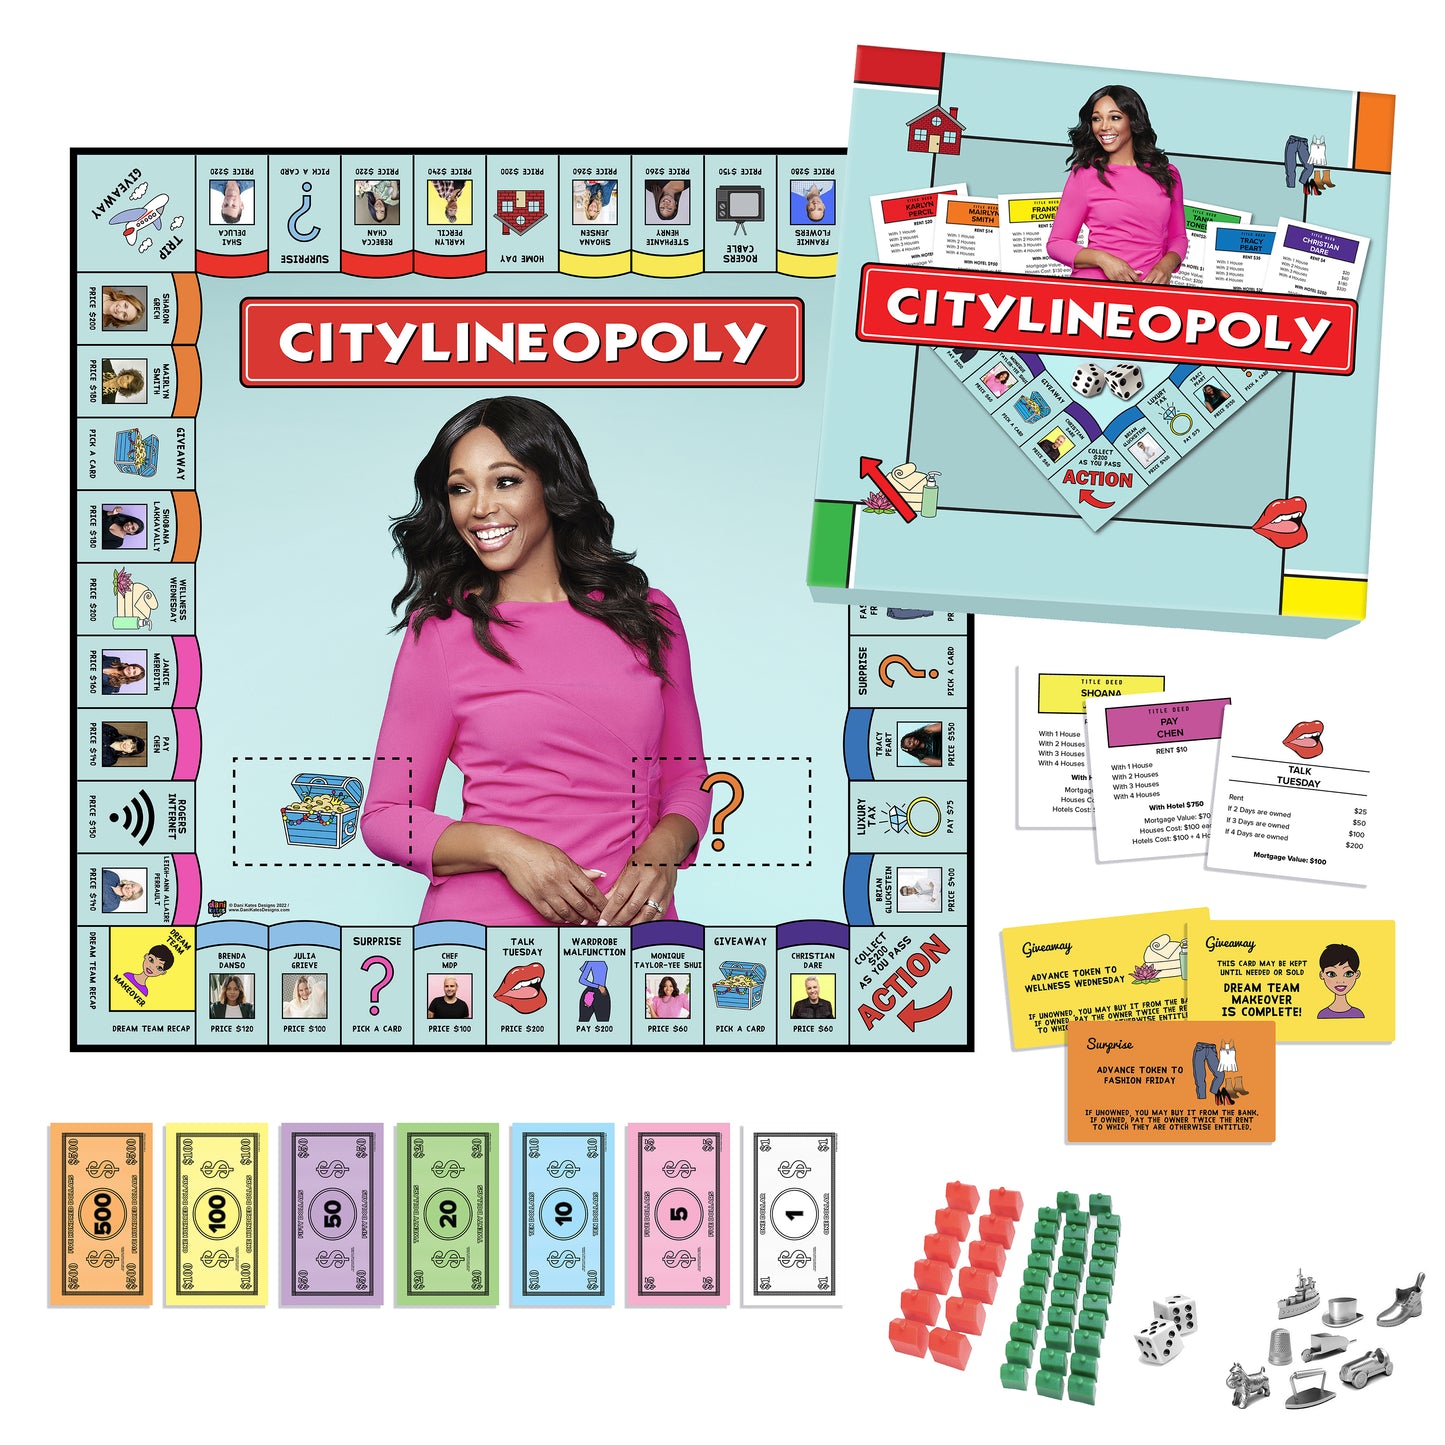 Citylineopoly AS SEEN ON Cityline hosted by Tracy Moore